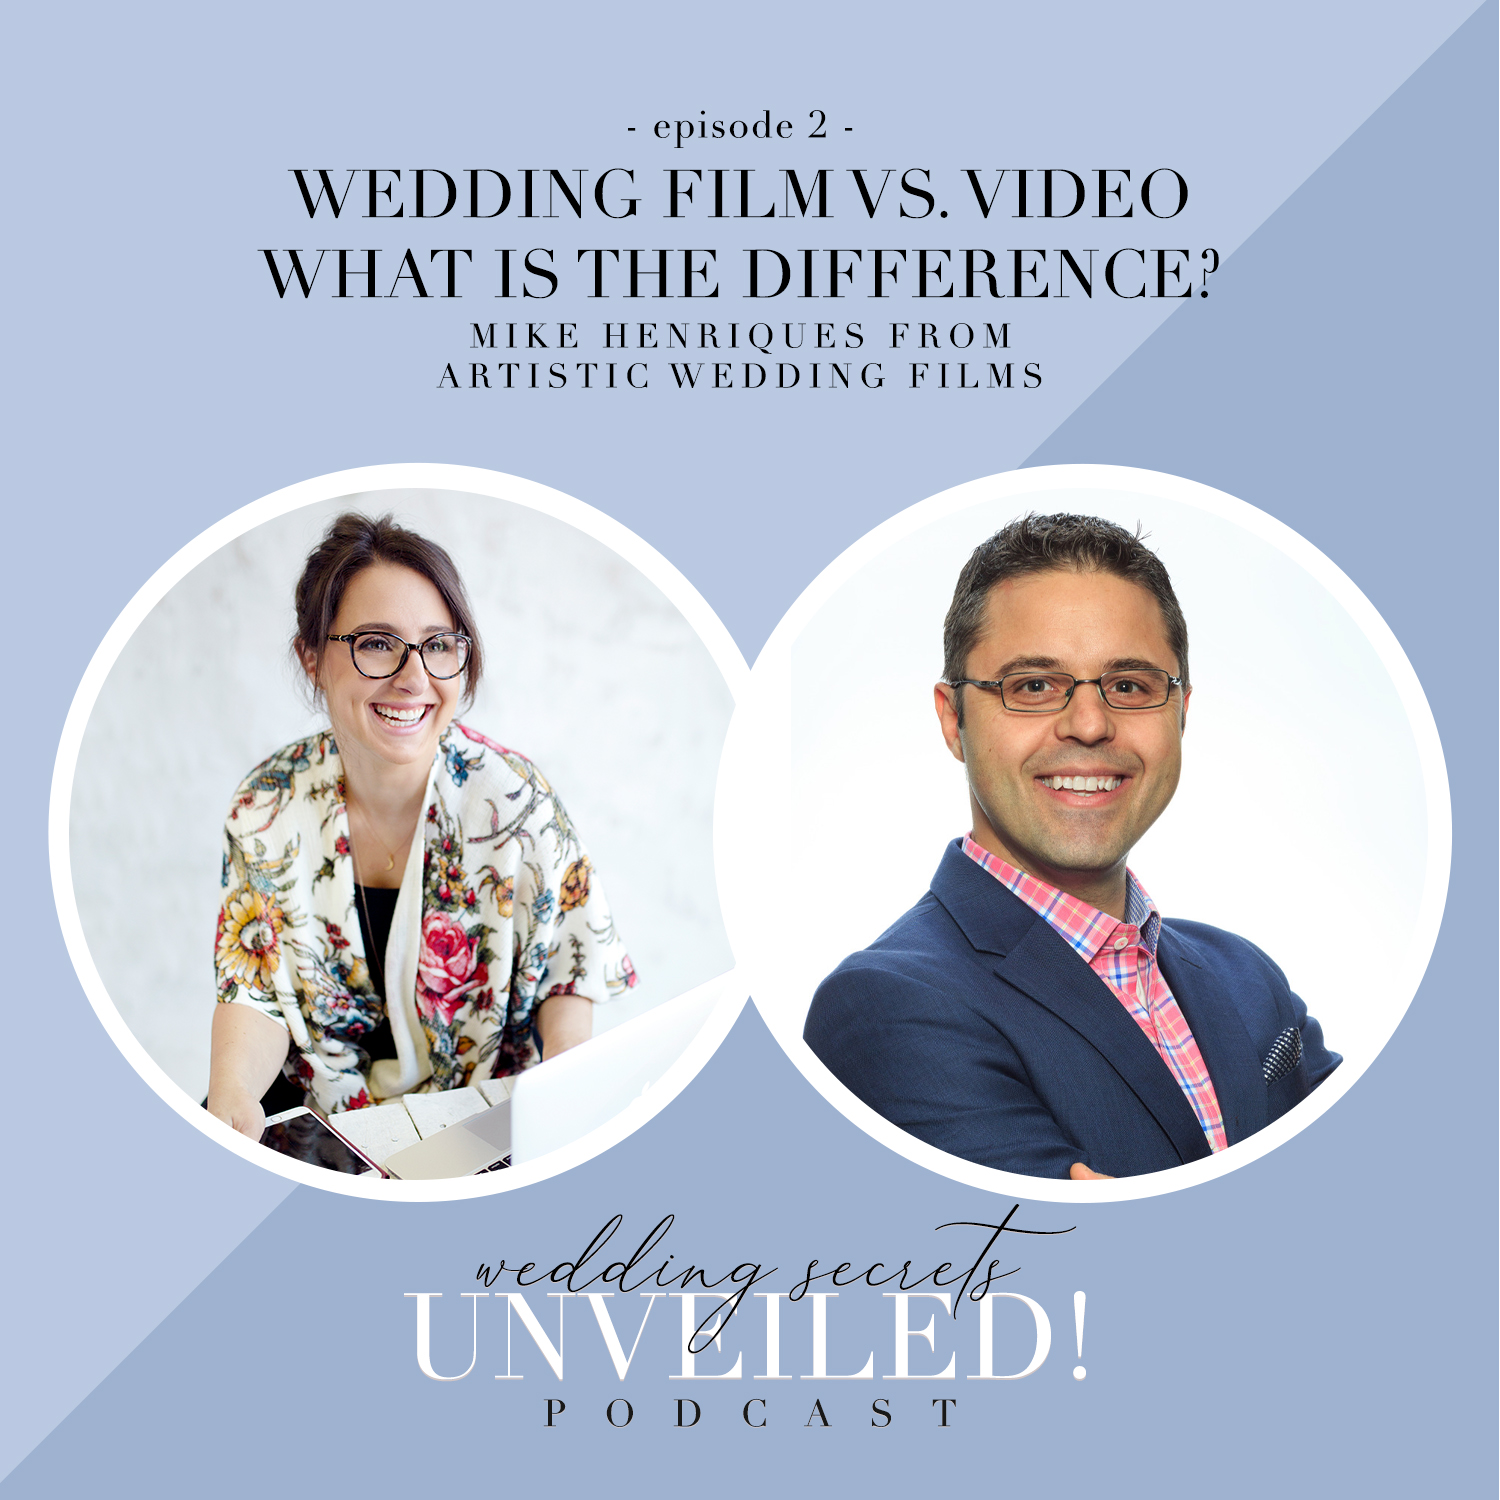 Wedding films and videos: what's the difference shared by Artistic Wedding Films